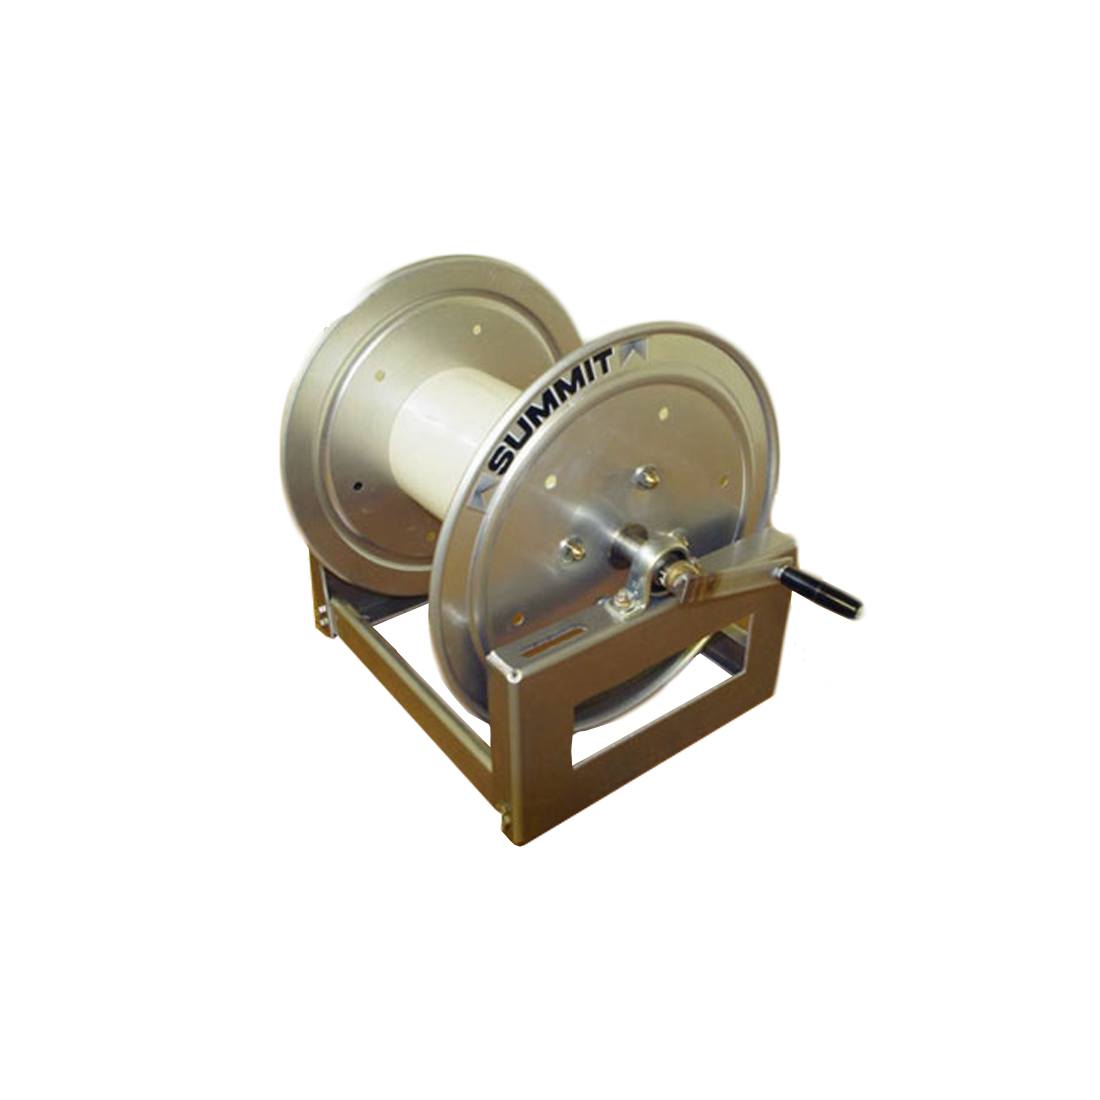 Summit SM Series - Aluminum Hose Reel with 1/2 Inch Inlet - Left Oblique View